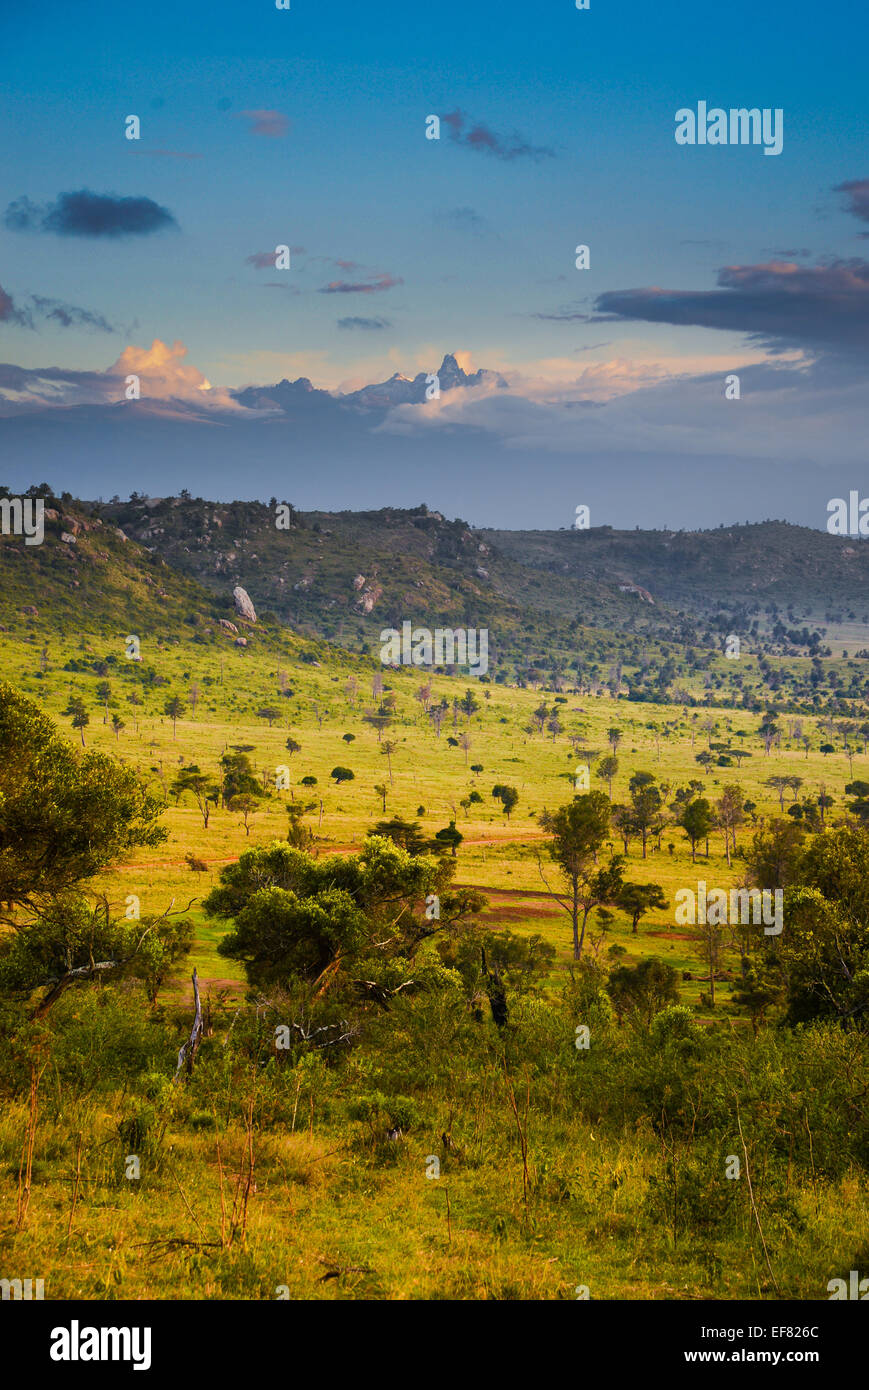 The Lakipia district in the central region of Kenya, on the equator looking south towards Mount Kenya Stock Photo